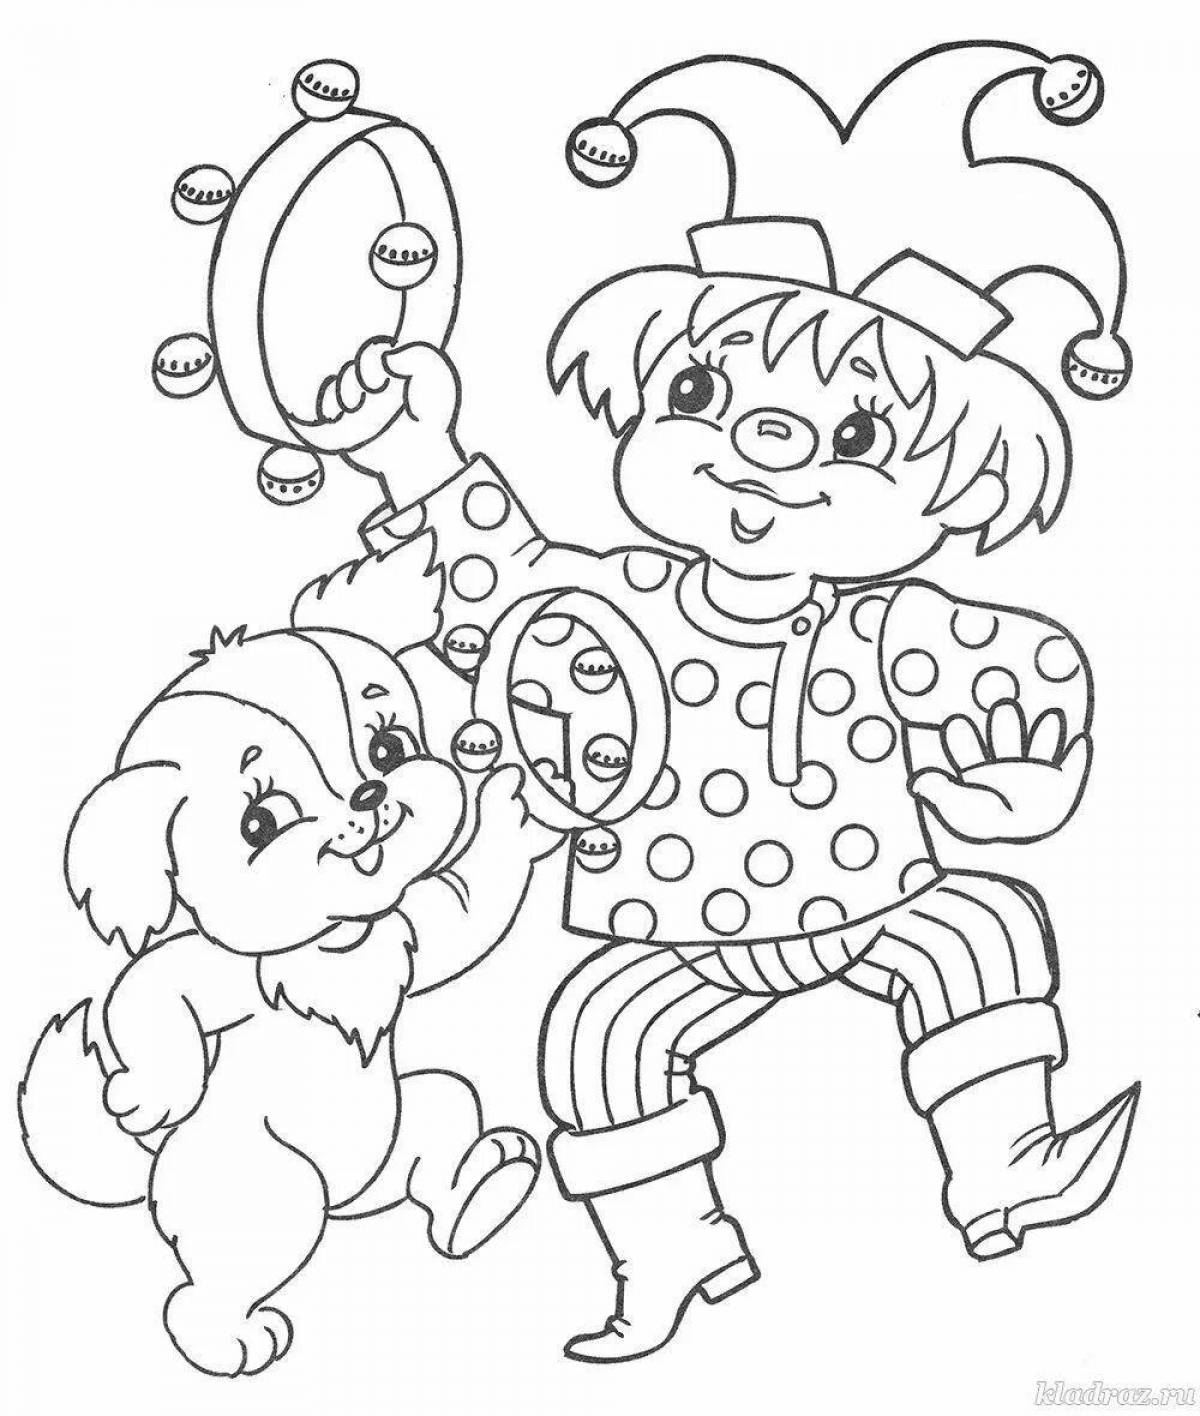 Coloring book witty jester for kids